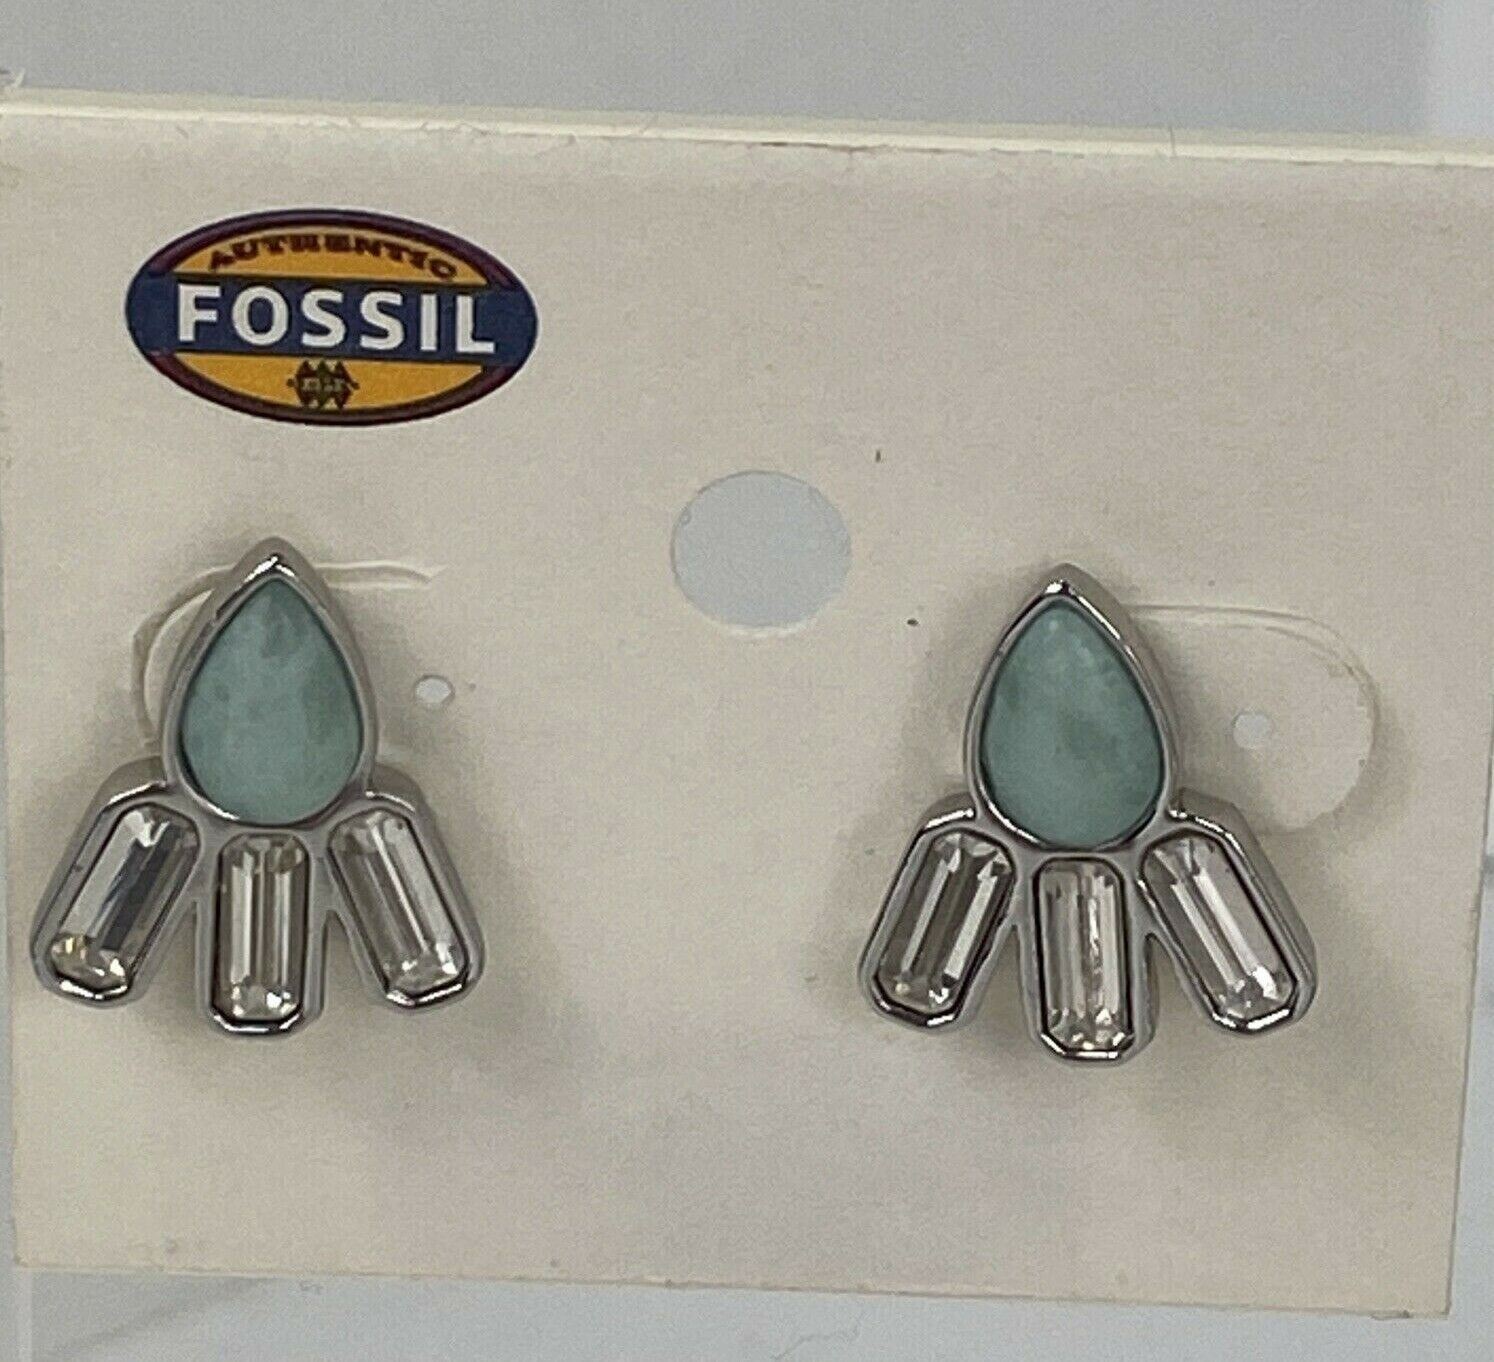 Primary image for New Fossil Earrings Blue Stones White Crystals Silver  $44 J2